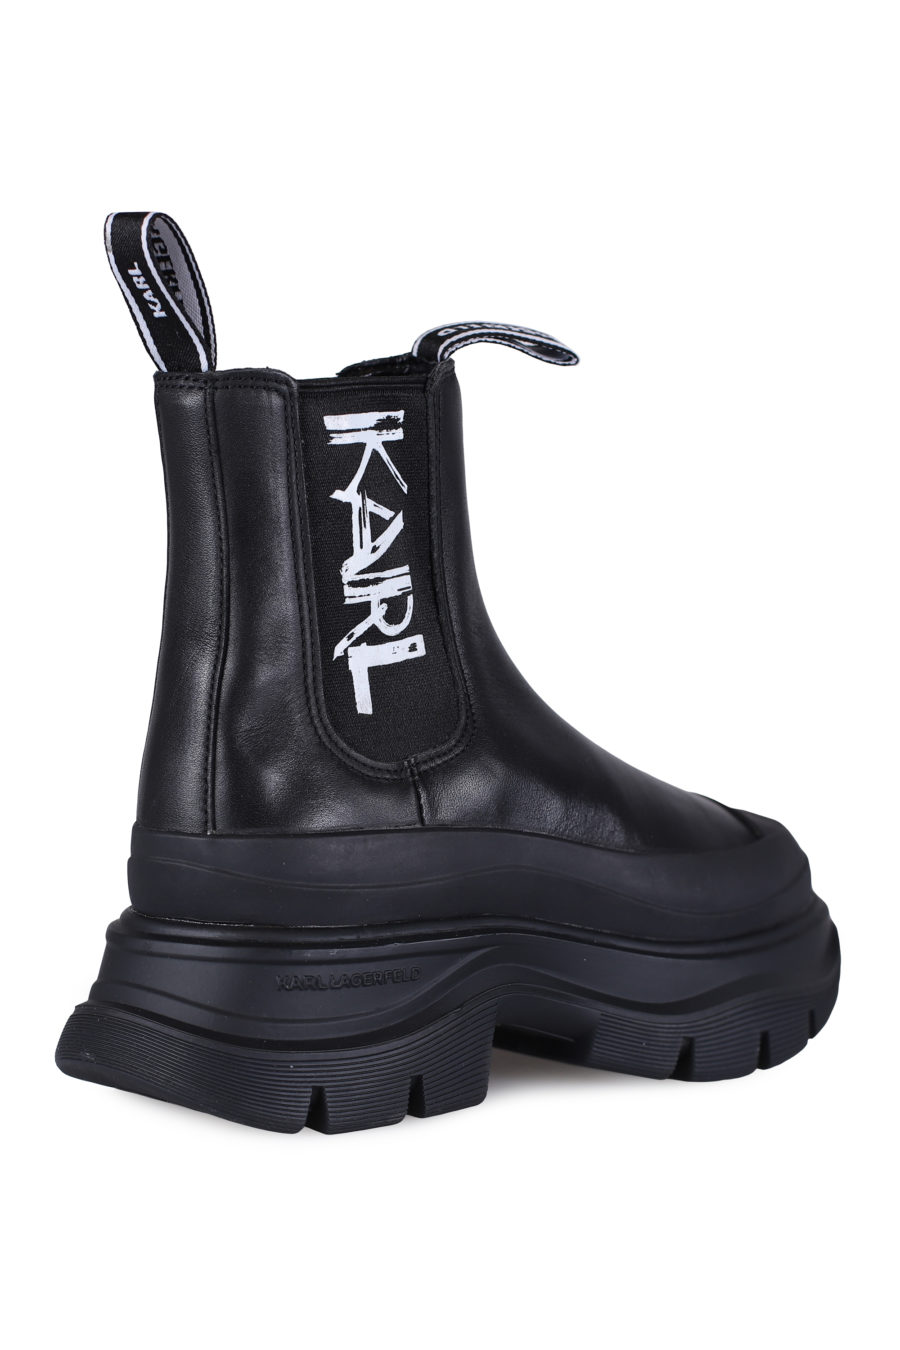 Black ankle boots with platform and "art deco" logo - IMG 0730